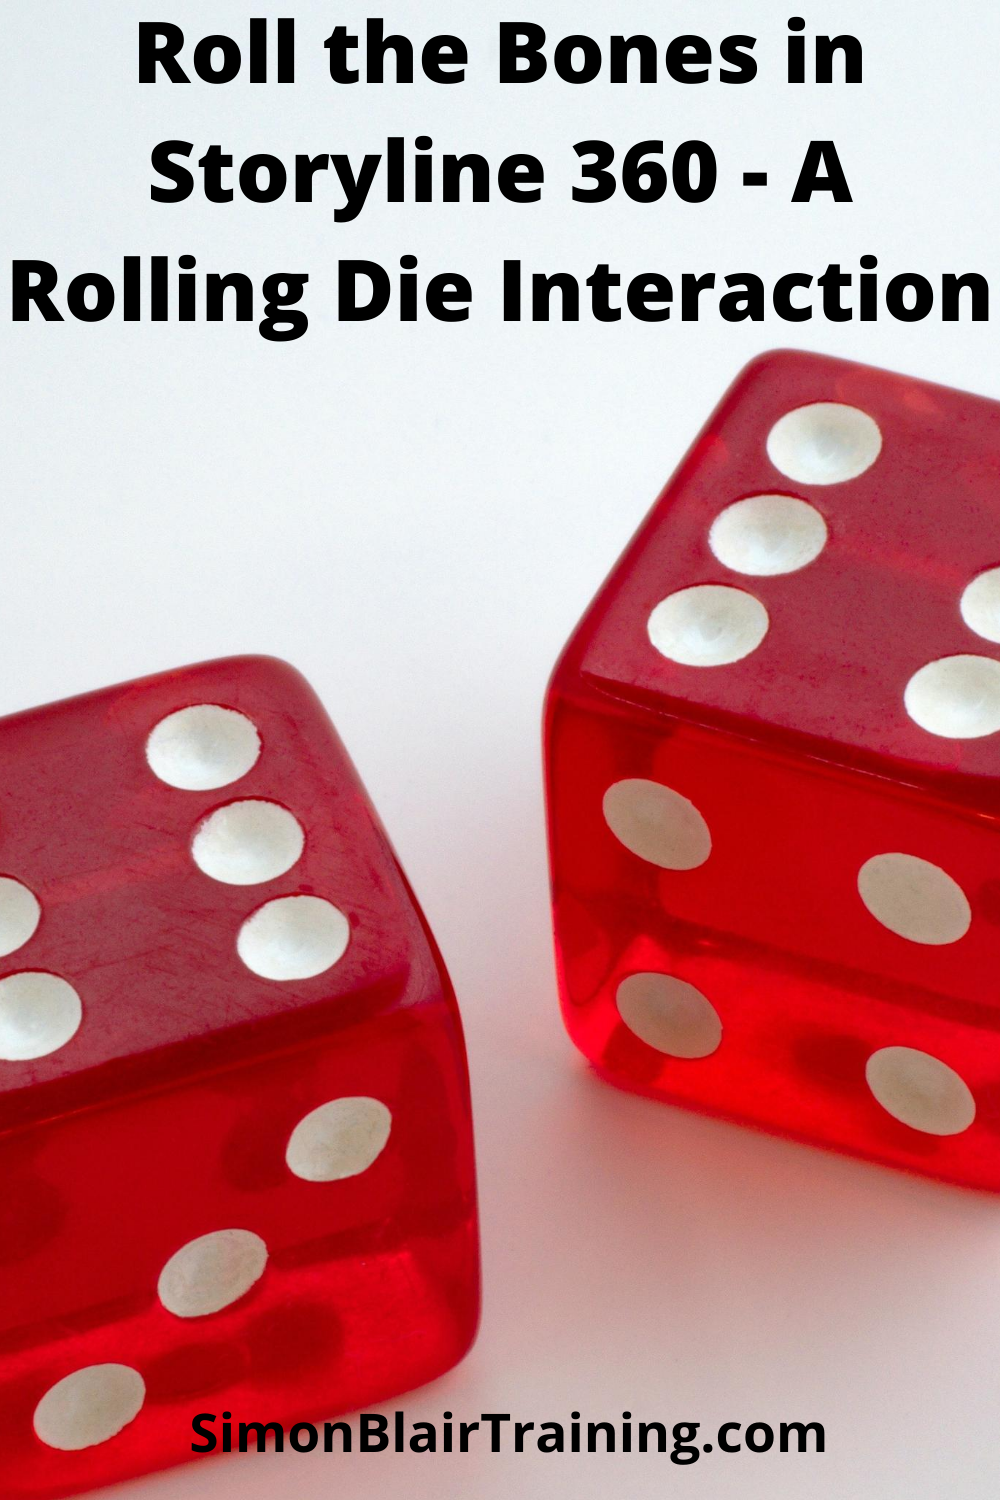 Simon Blair: Roll the Bones in Storyline 360 - A Rolling Die Interaction